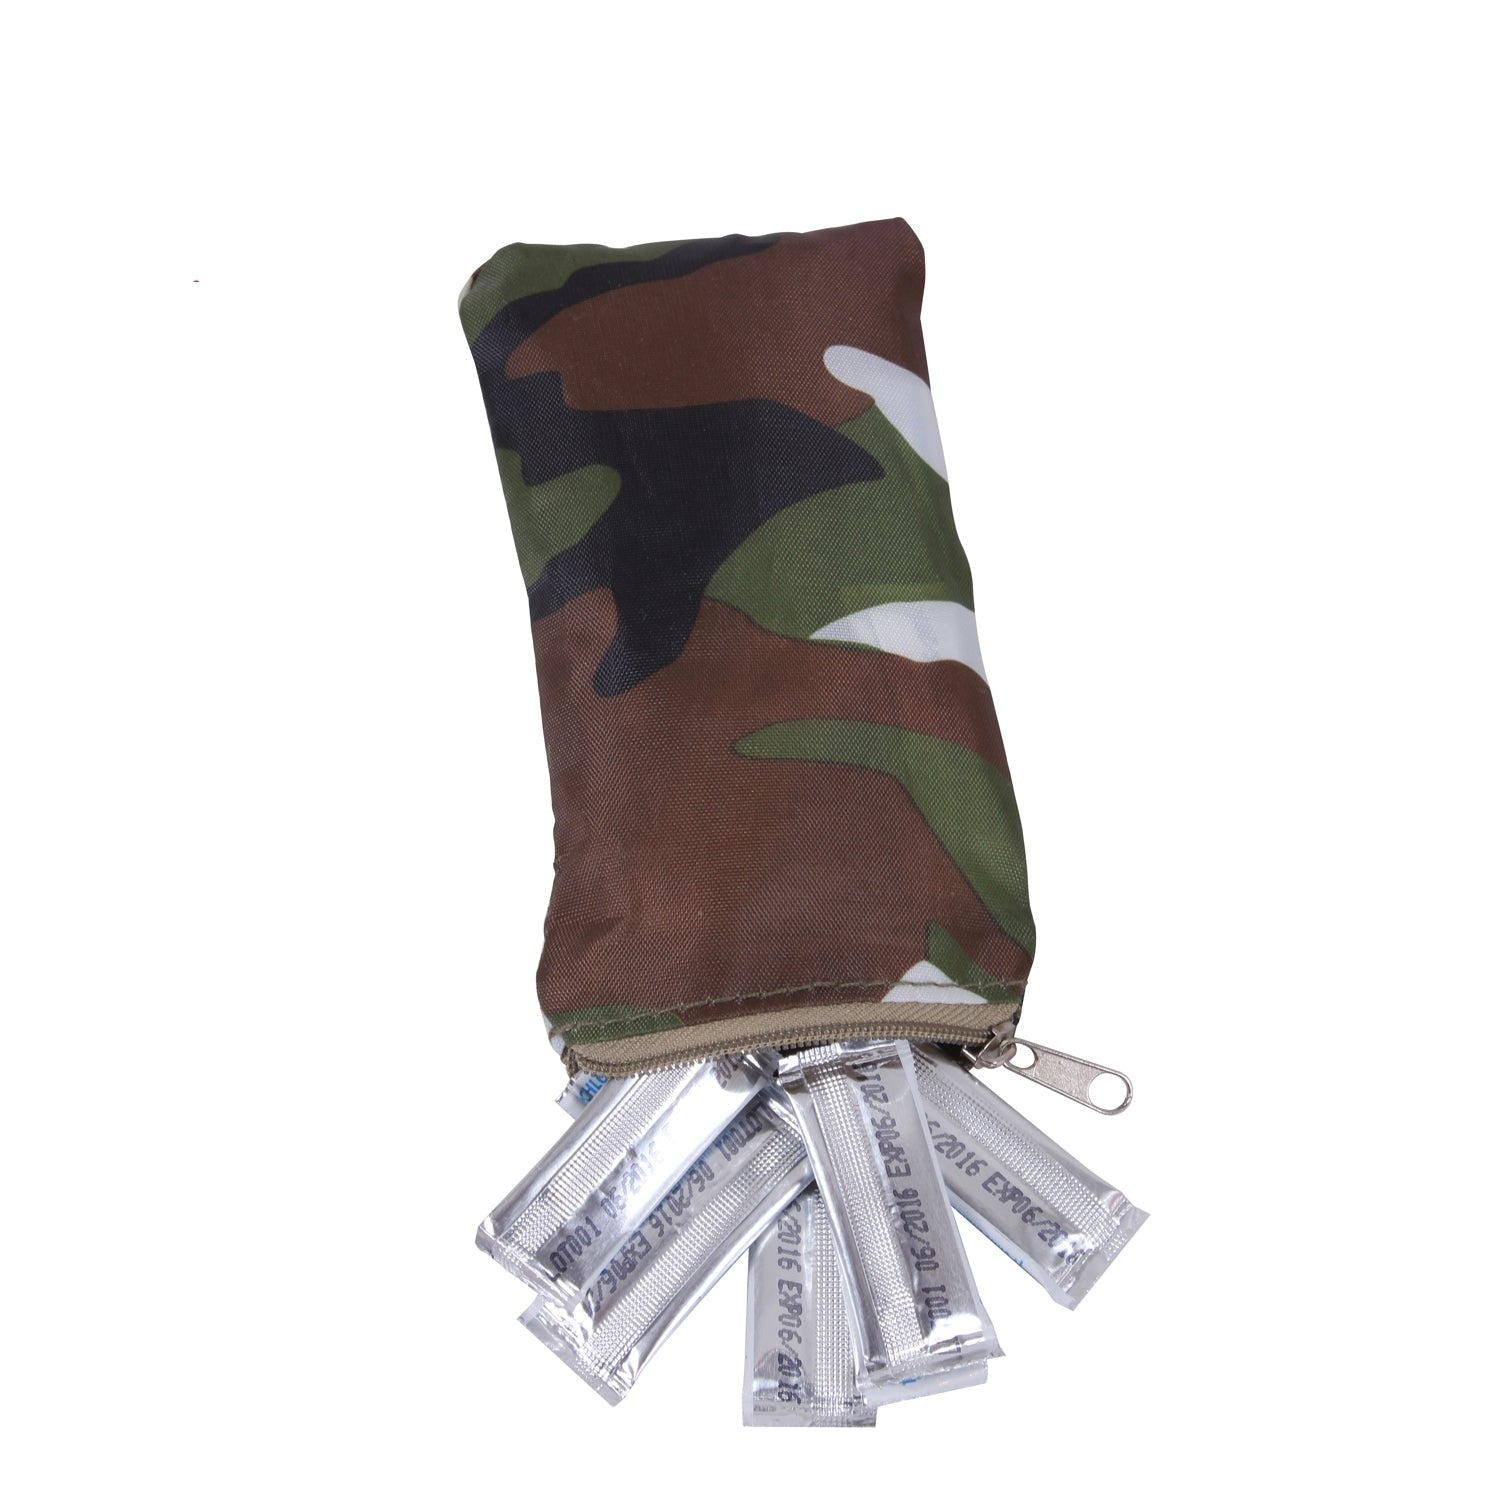 Chlor Floc Military Water Purification Powder Packets - Tactical Choice Plus